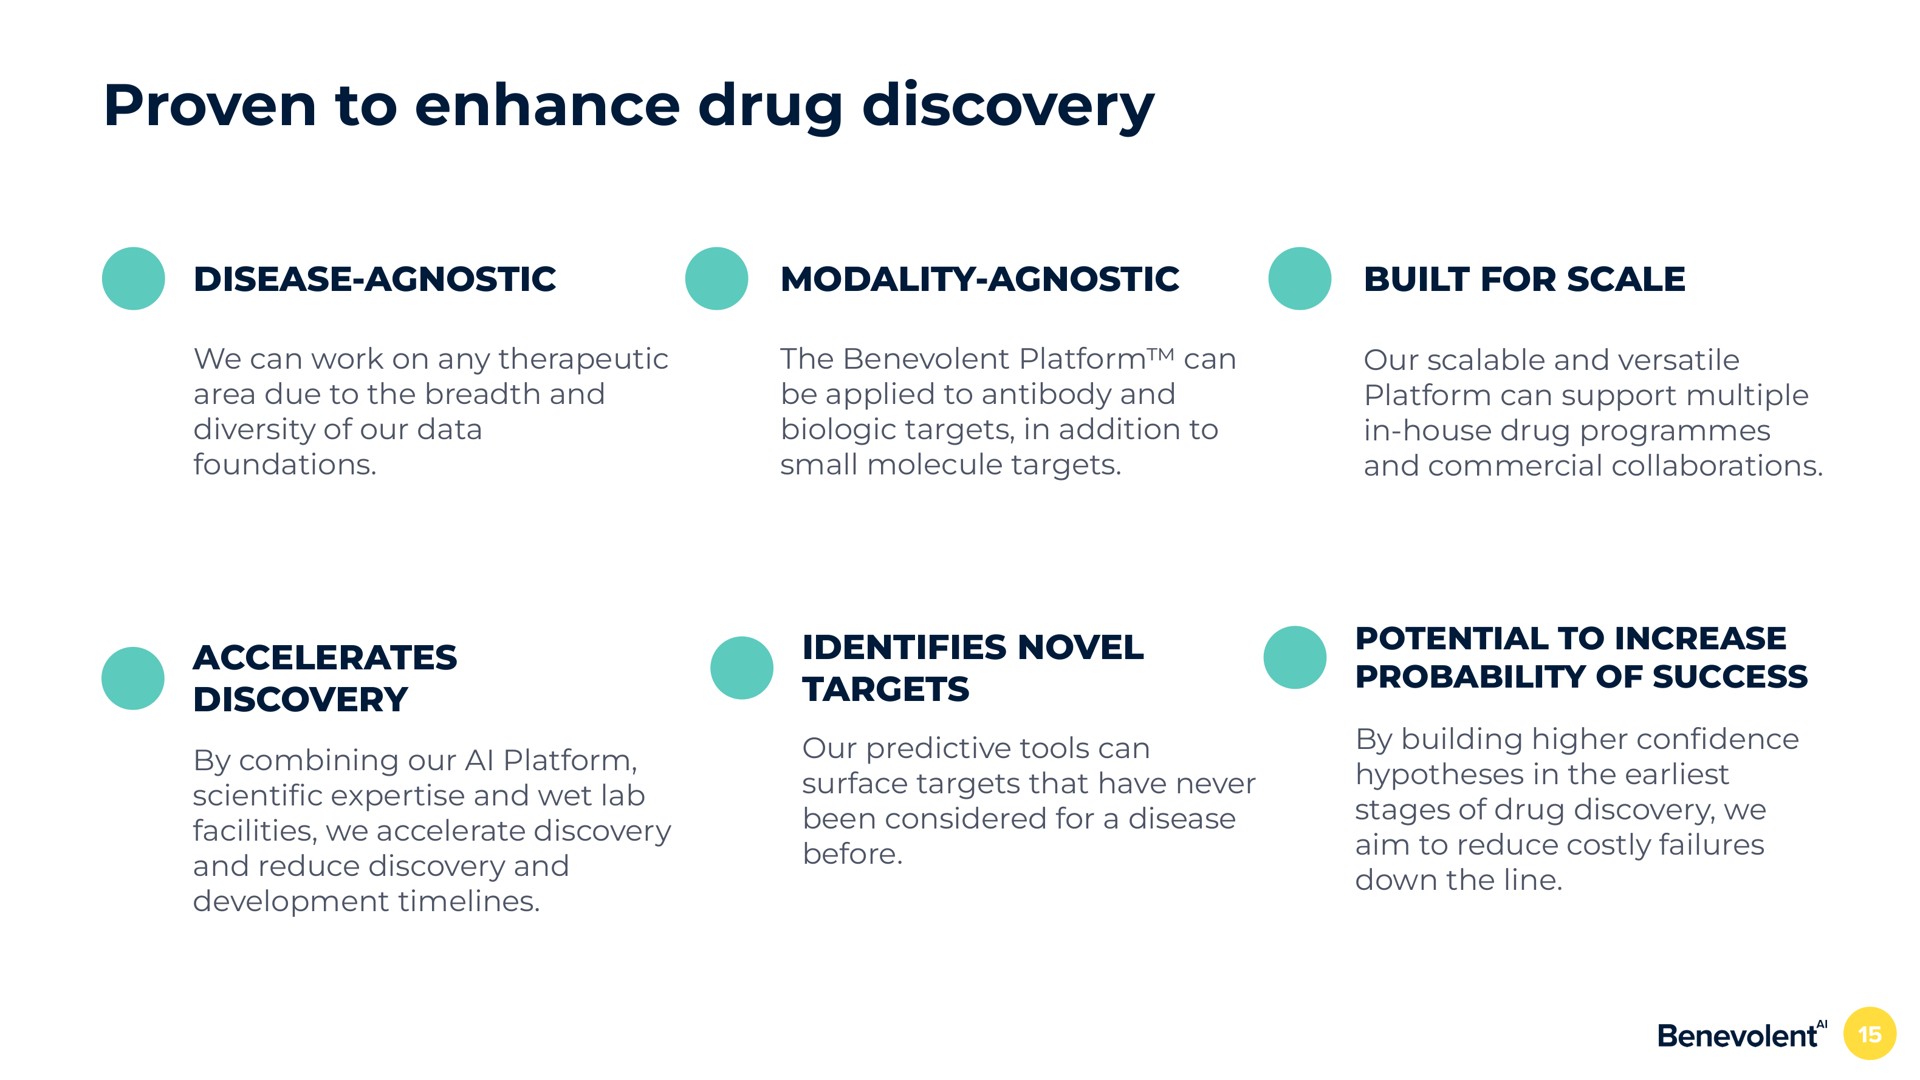 proven to enhance drug discovery disease agnostic modality agnostic built for scale we can work on any therapeutic area due to the breadth and diversity of our data foundations the benevolent platform can be applied to antibody and biologic targets in addition to small molecule targets our scalable and versatile platform can support multiple in house drug programmes and commercial collaborations accelerates discovery by combining our platform and wet lab facilities we accelerate discovery and reduce discovery and development identifies novel targets our predictive tools can surface targets that have never been considered for a disease before potential to increase probability of success by building higher con hypotheses in the stages of drug discovery we aim to reduce costly failures down the line | BenevolentAI